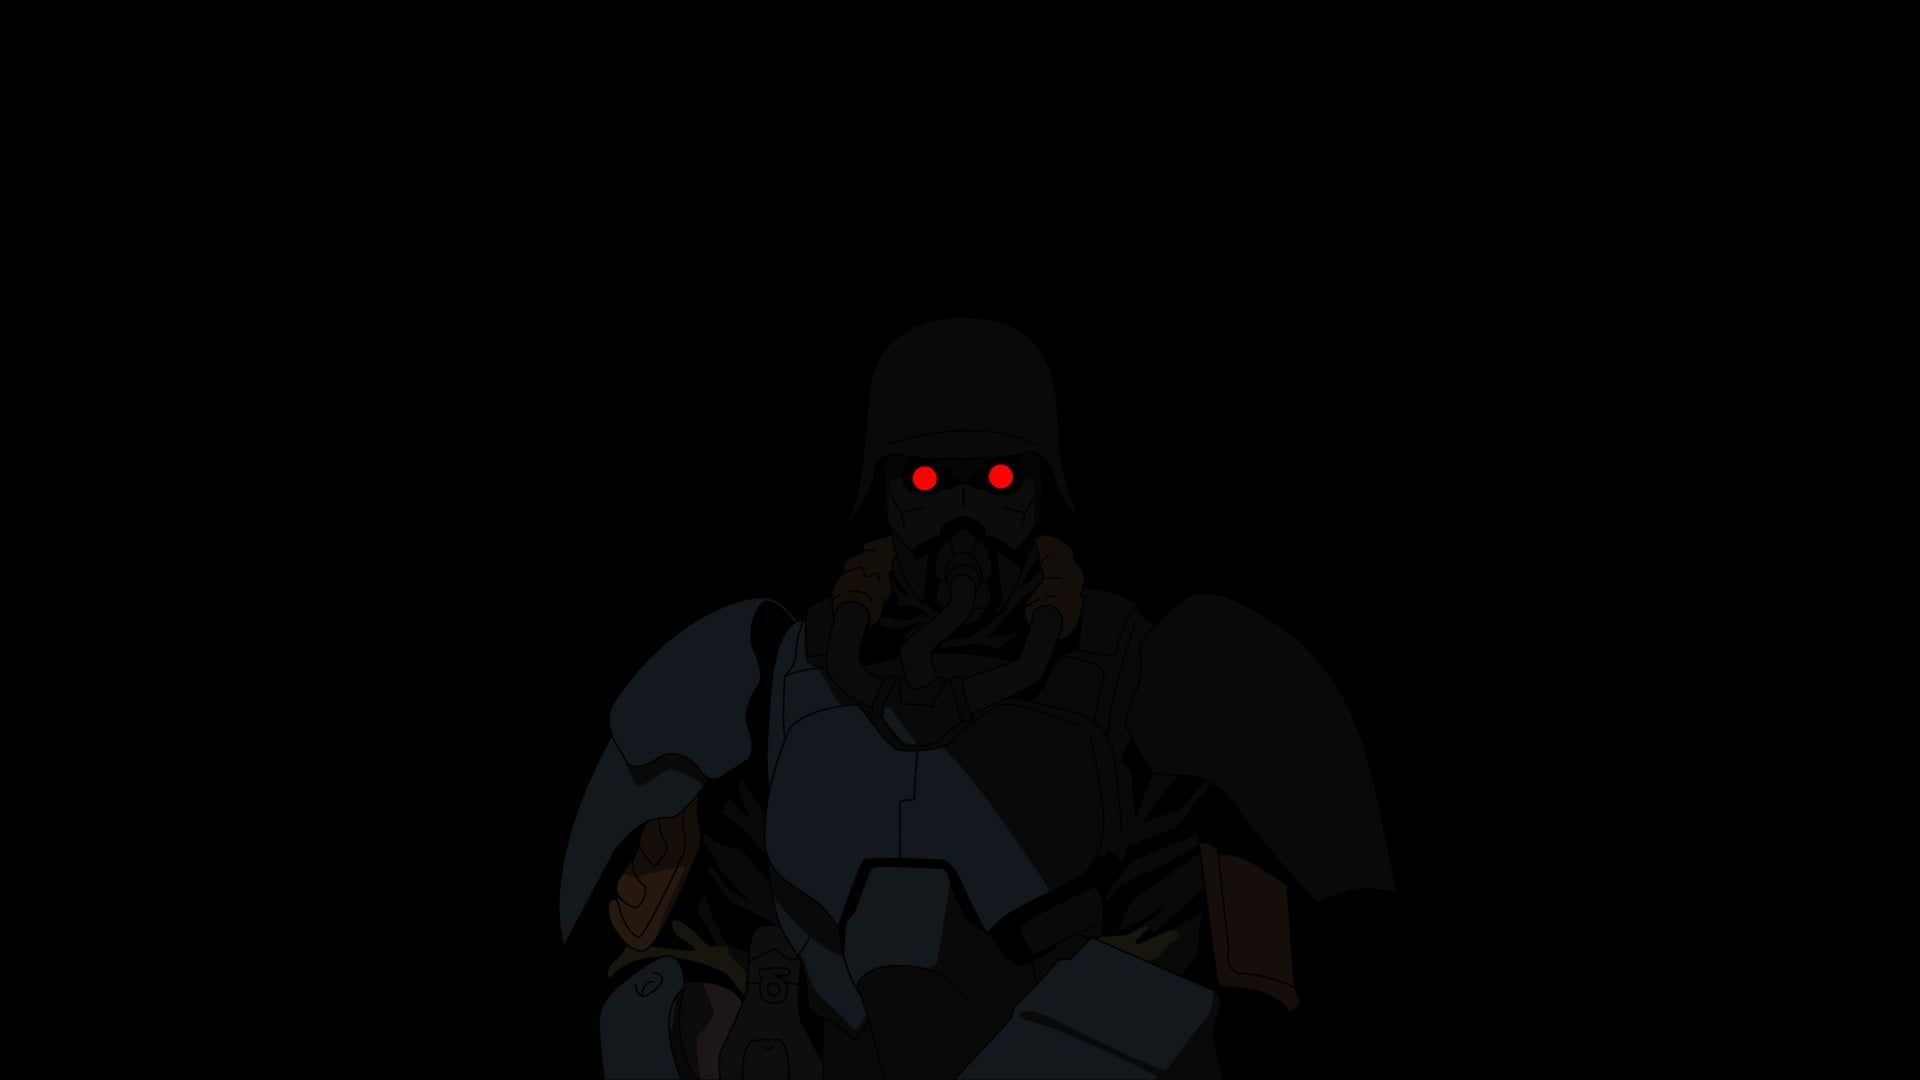 Anime Character Soldier Poster #Jin Roh Red Eyes #black #anime